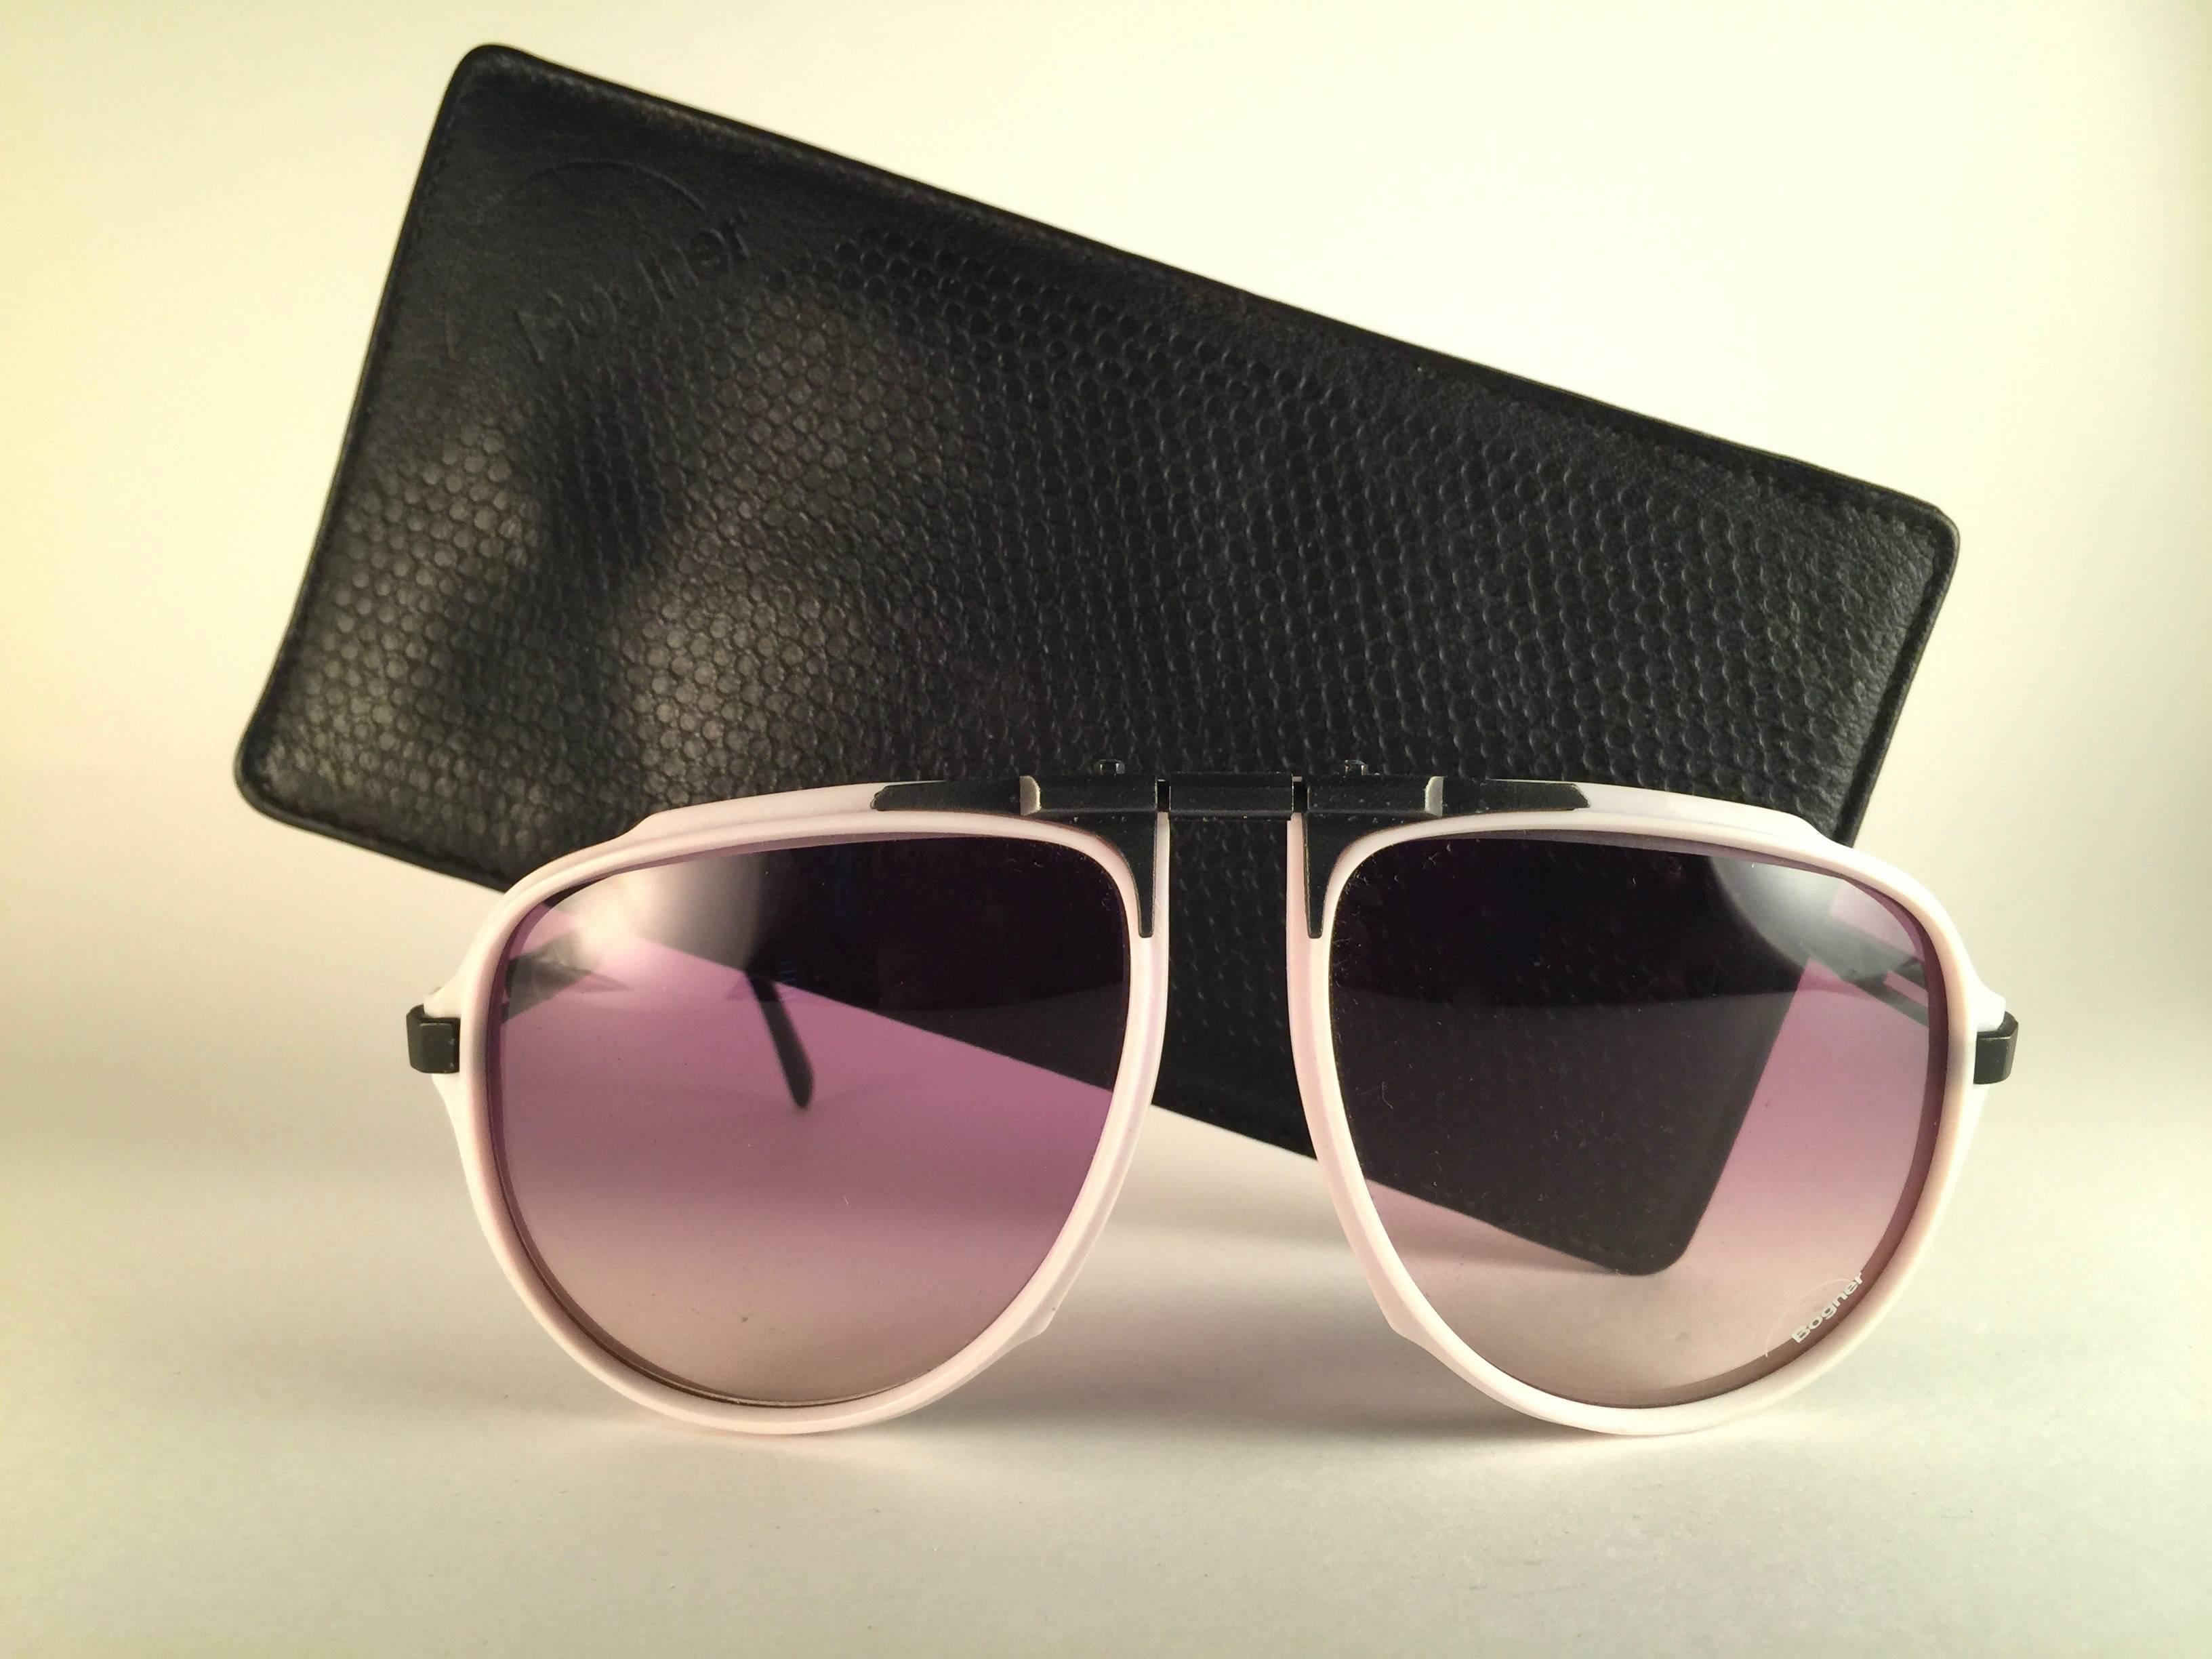 Super rare item. 

New vintage Bogner by Eschenbach sunglasses 7003 white & black with rose gradient lenses. The exact same model used by the late Roger Moore in a 